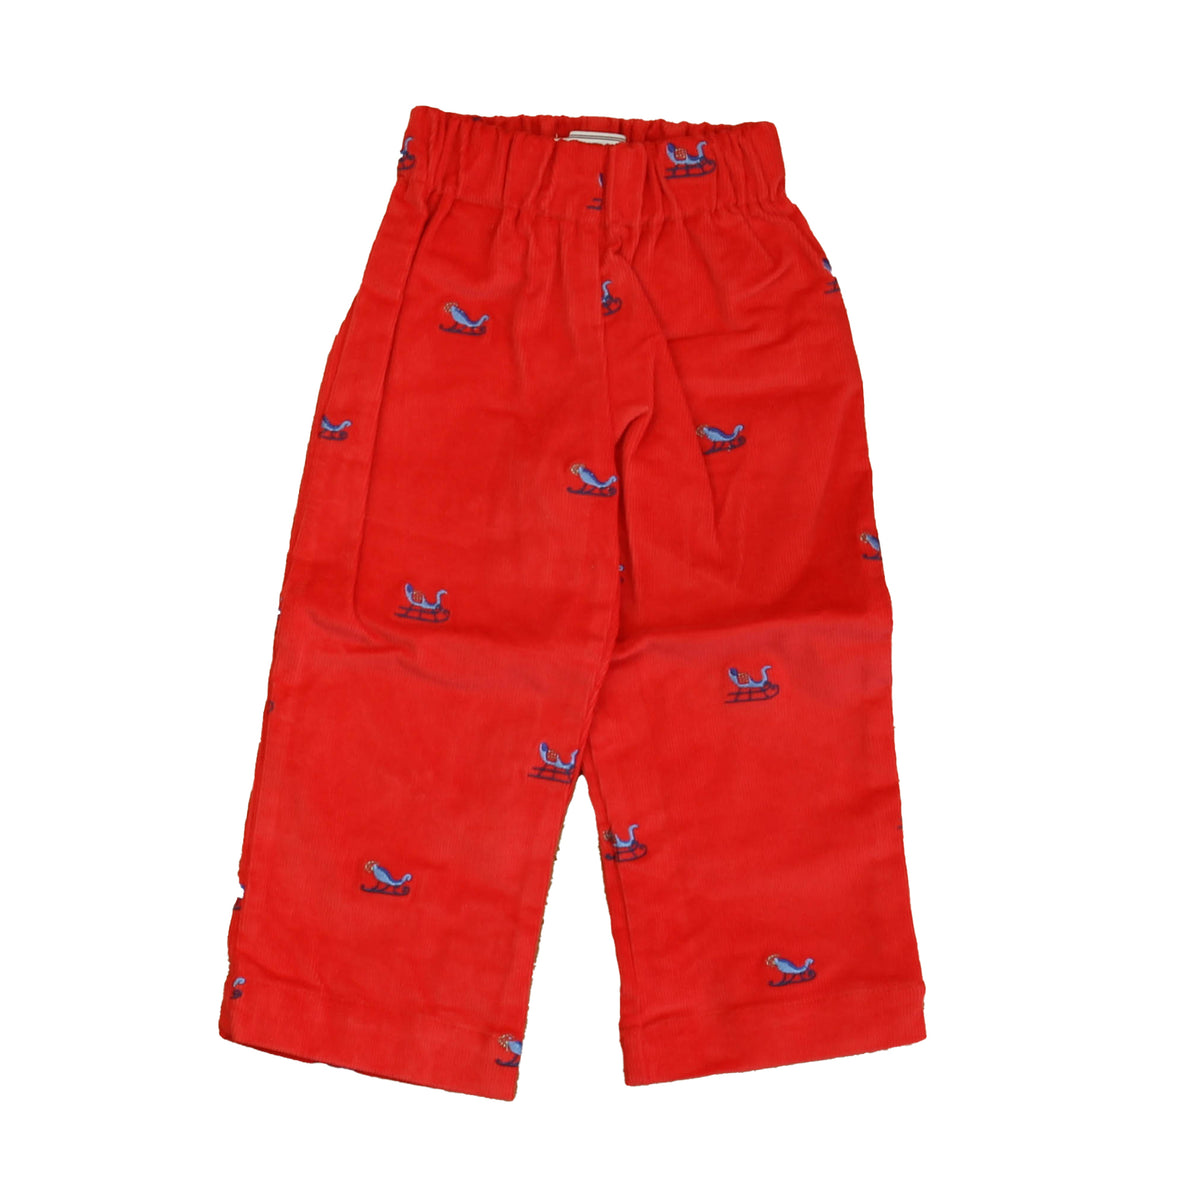 New with Tags: Tomato with Sleighs Pants -- FINAL SALE